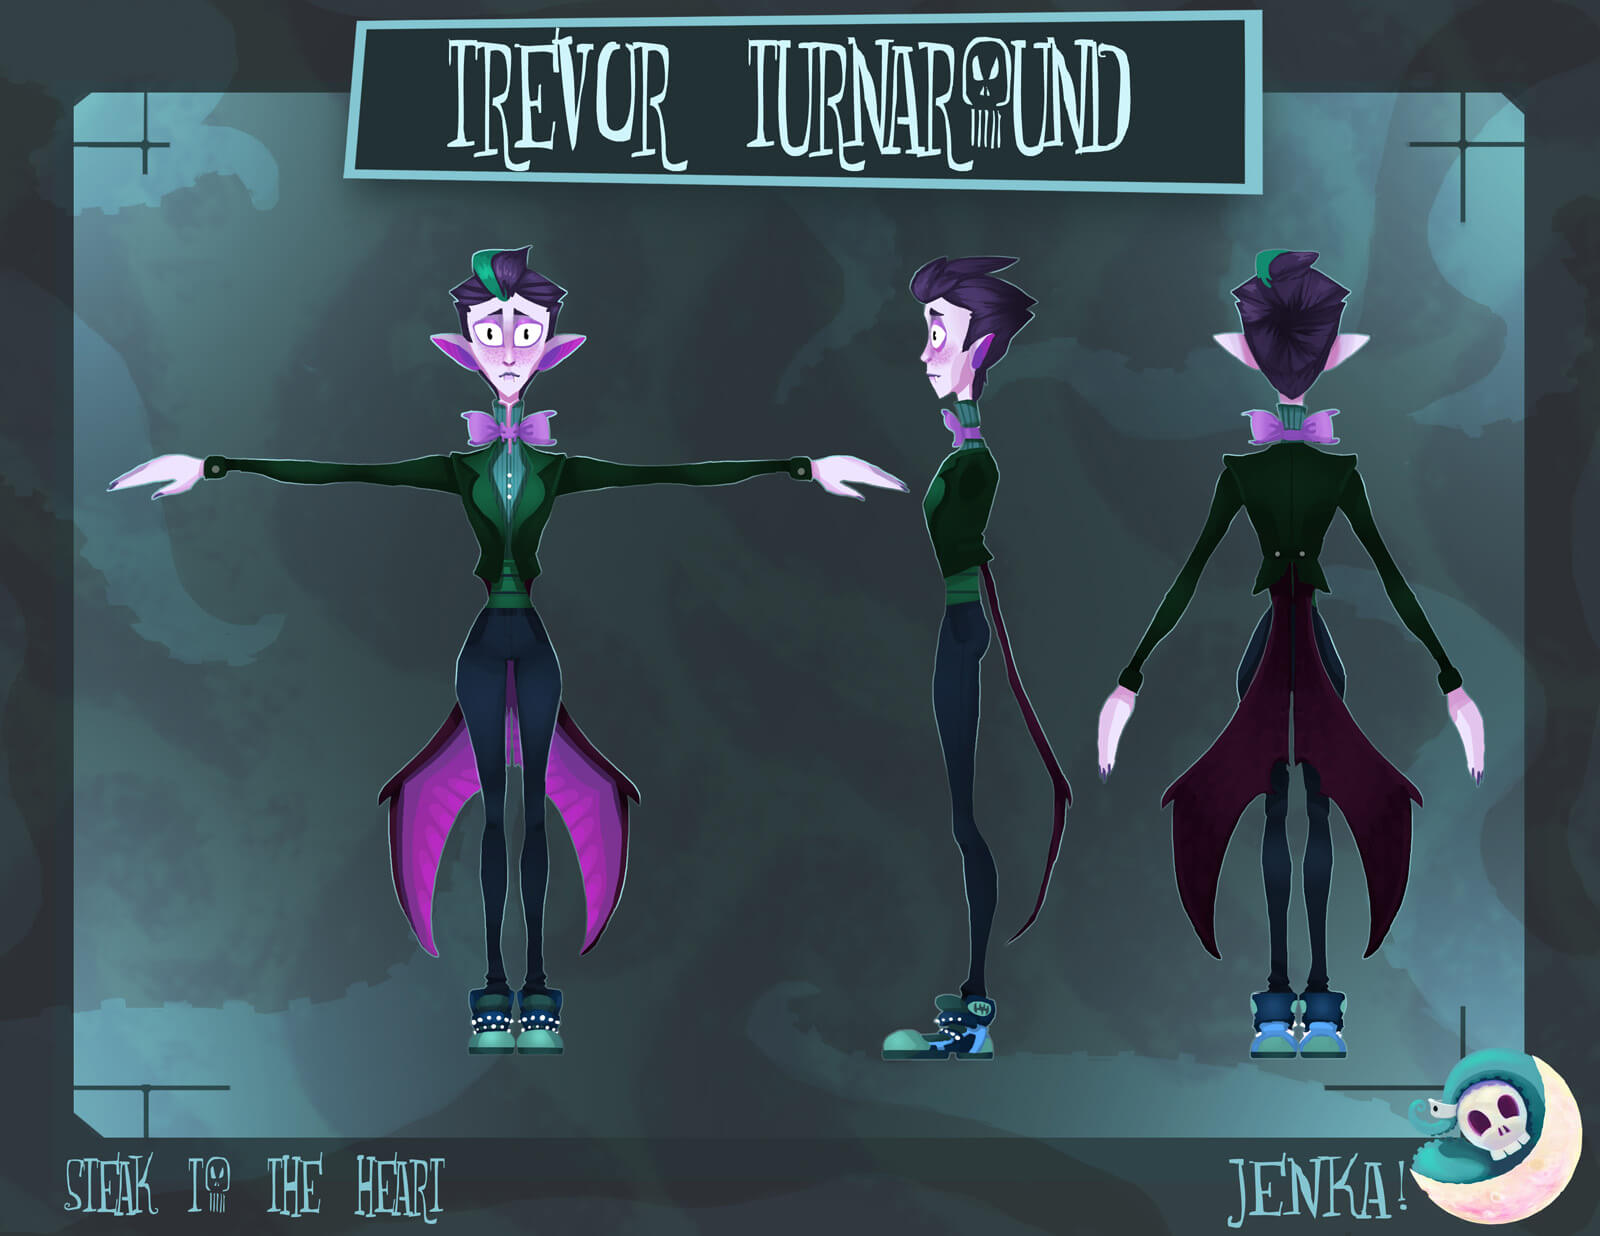 Three final designs of a pink vampire in a tuxedo from the film Steak to the Heart from the front, side, and back